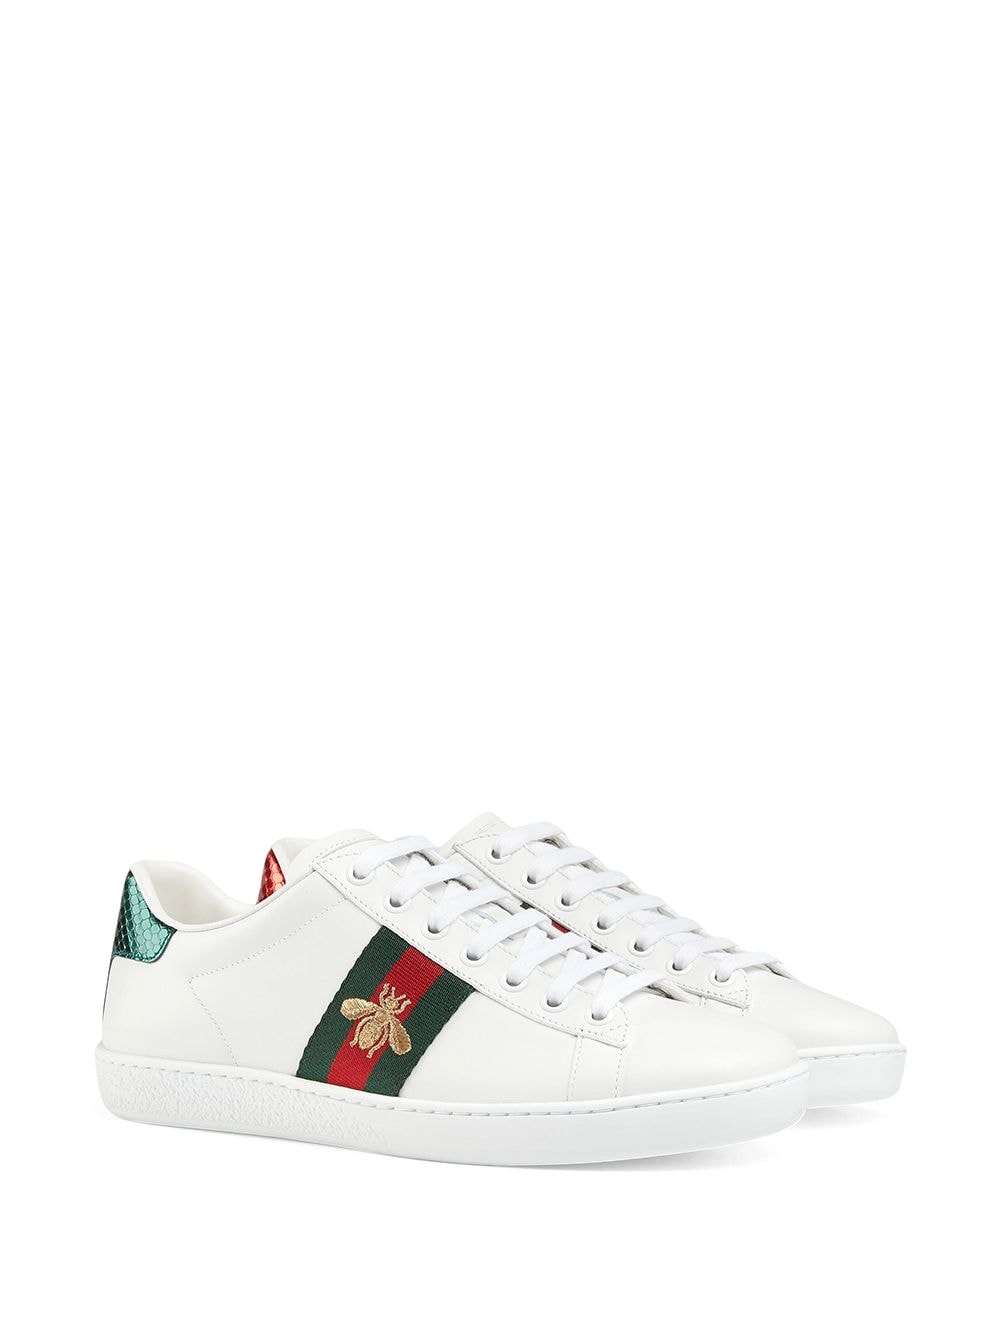 GUCCI embroidered Ace sneakers